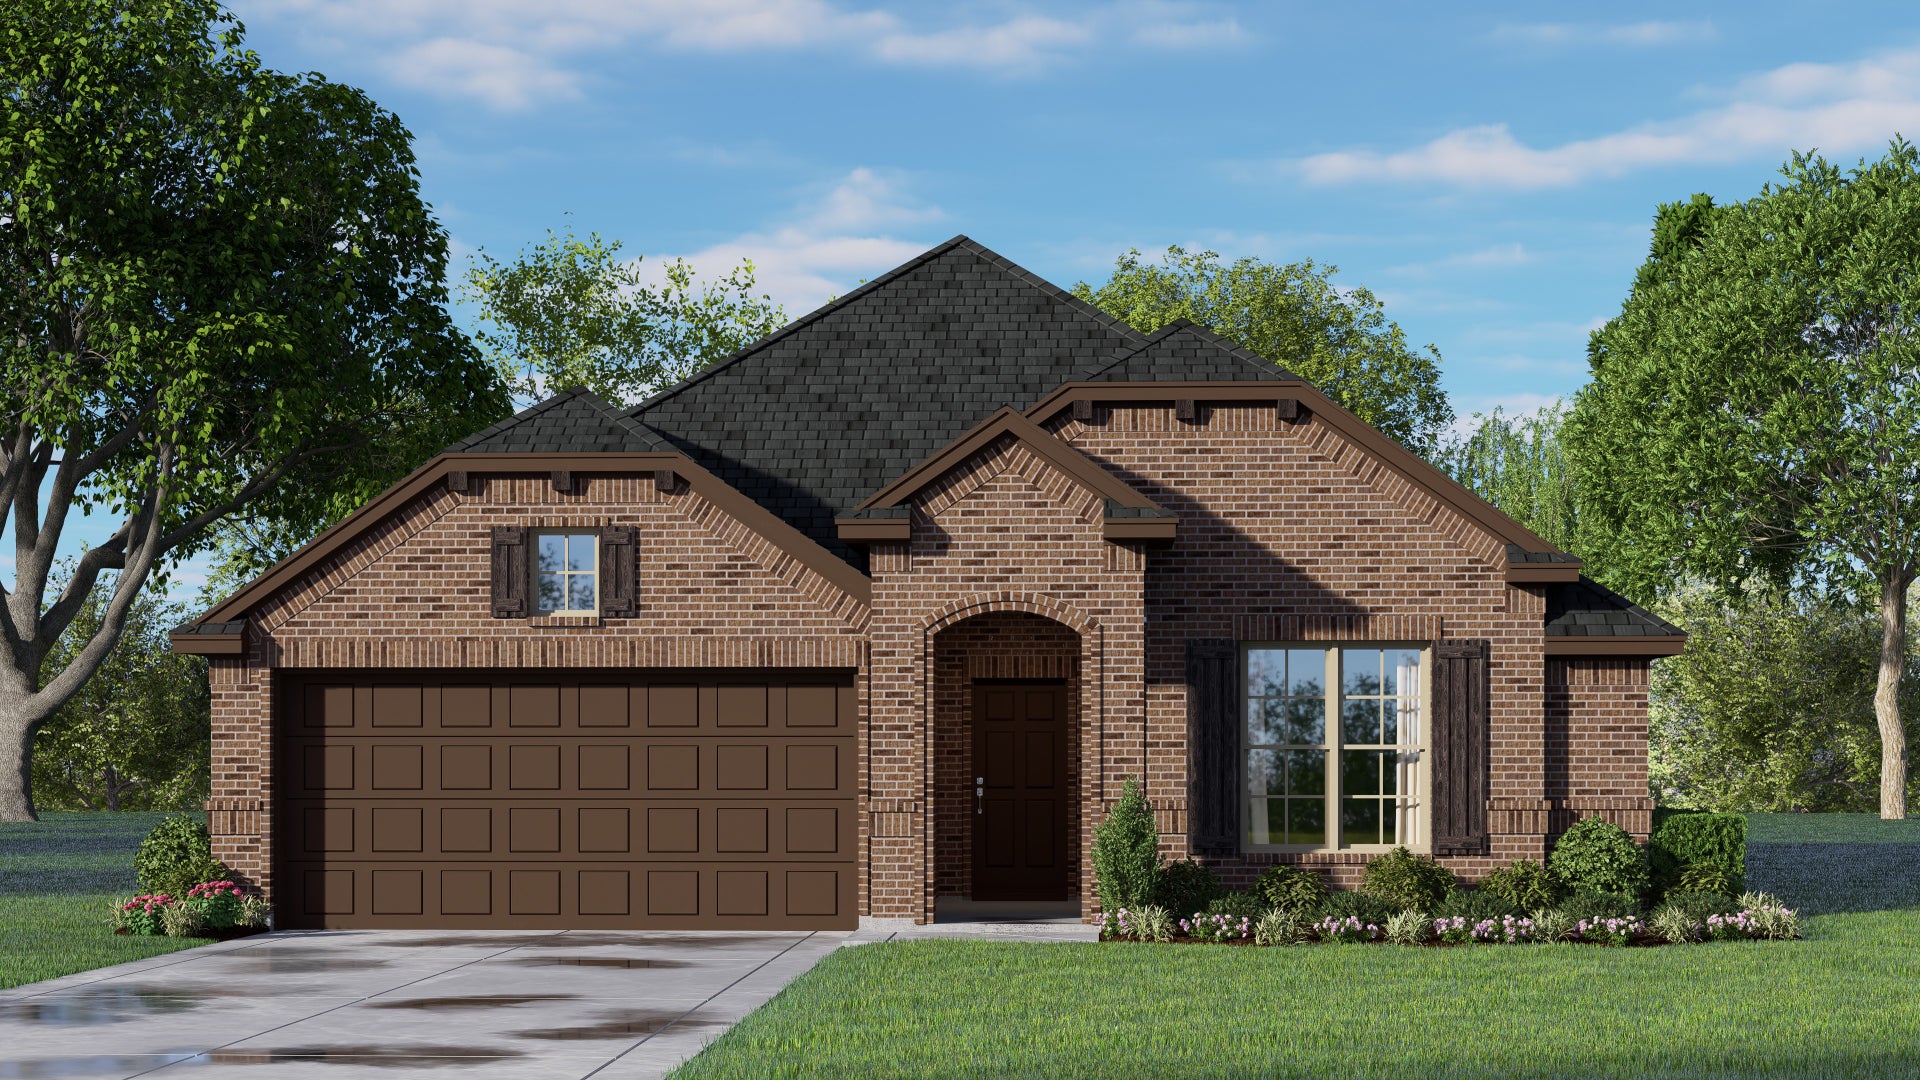 1660 C. 3br New Home in Fort Worth, TX